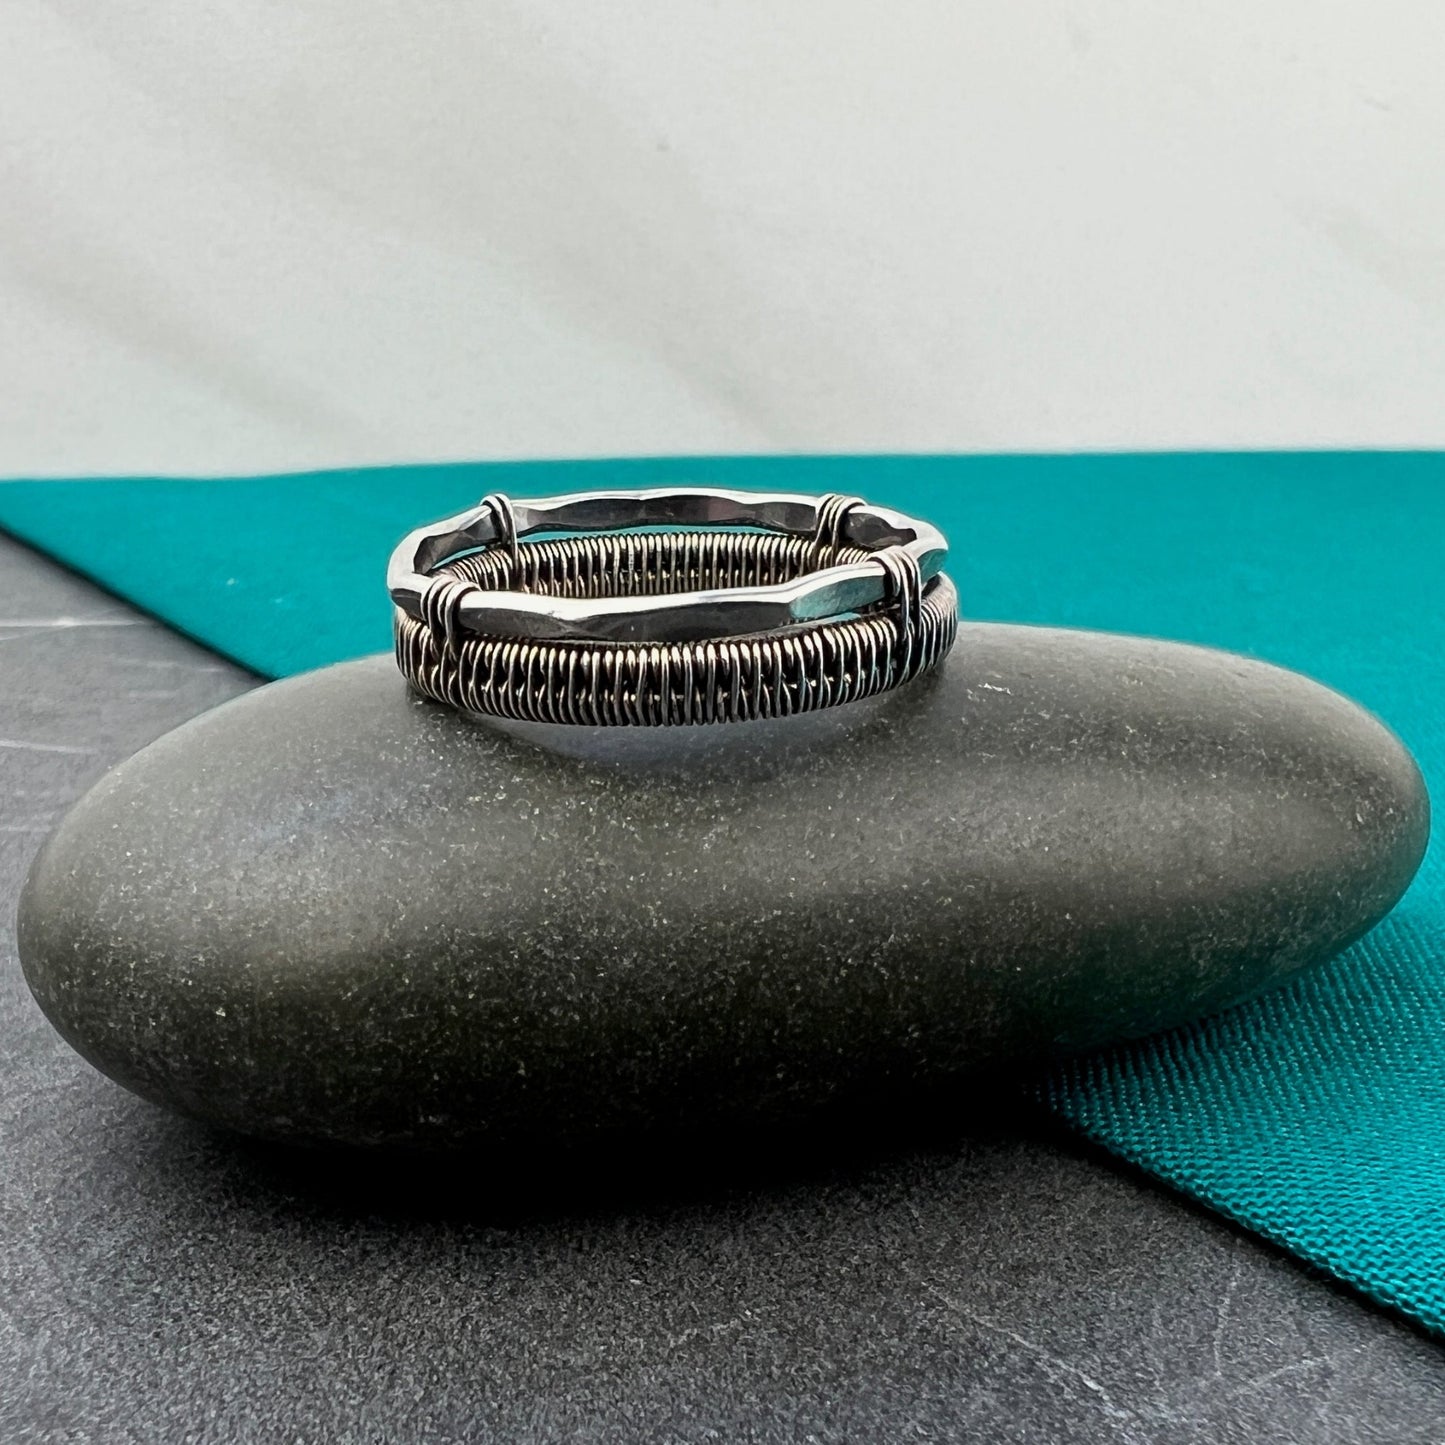 Woven & Hammered Silver Ring - Artisan Statement Piece